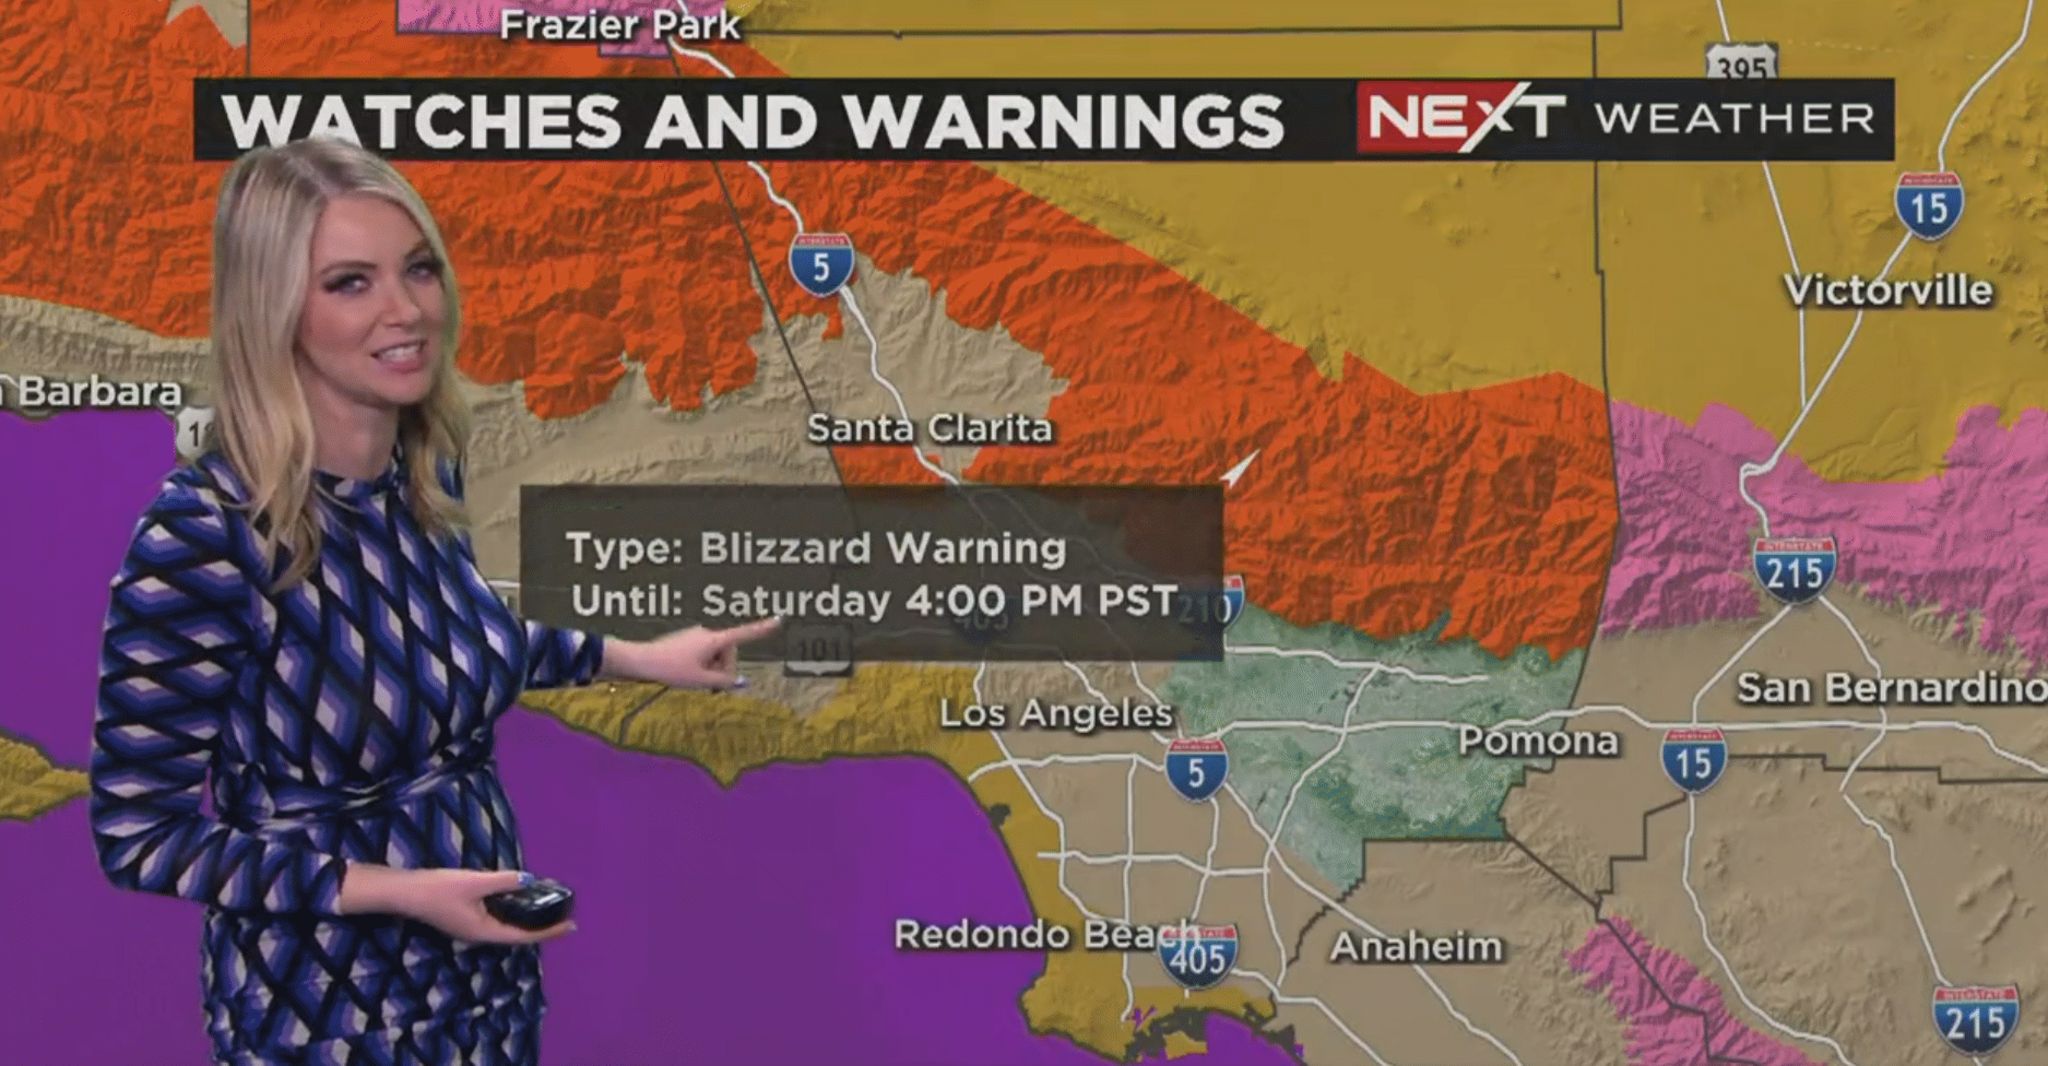 Los Angeles meteorologists marvel at blizzard warnings BBC News